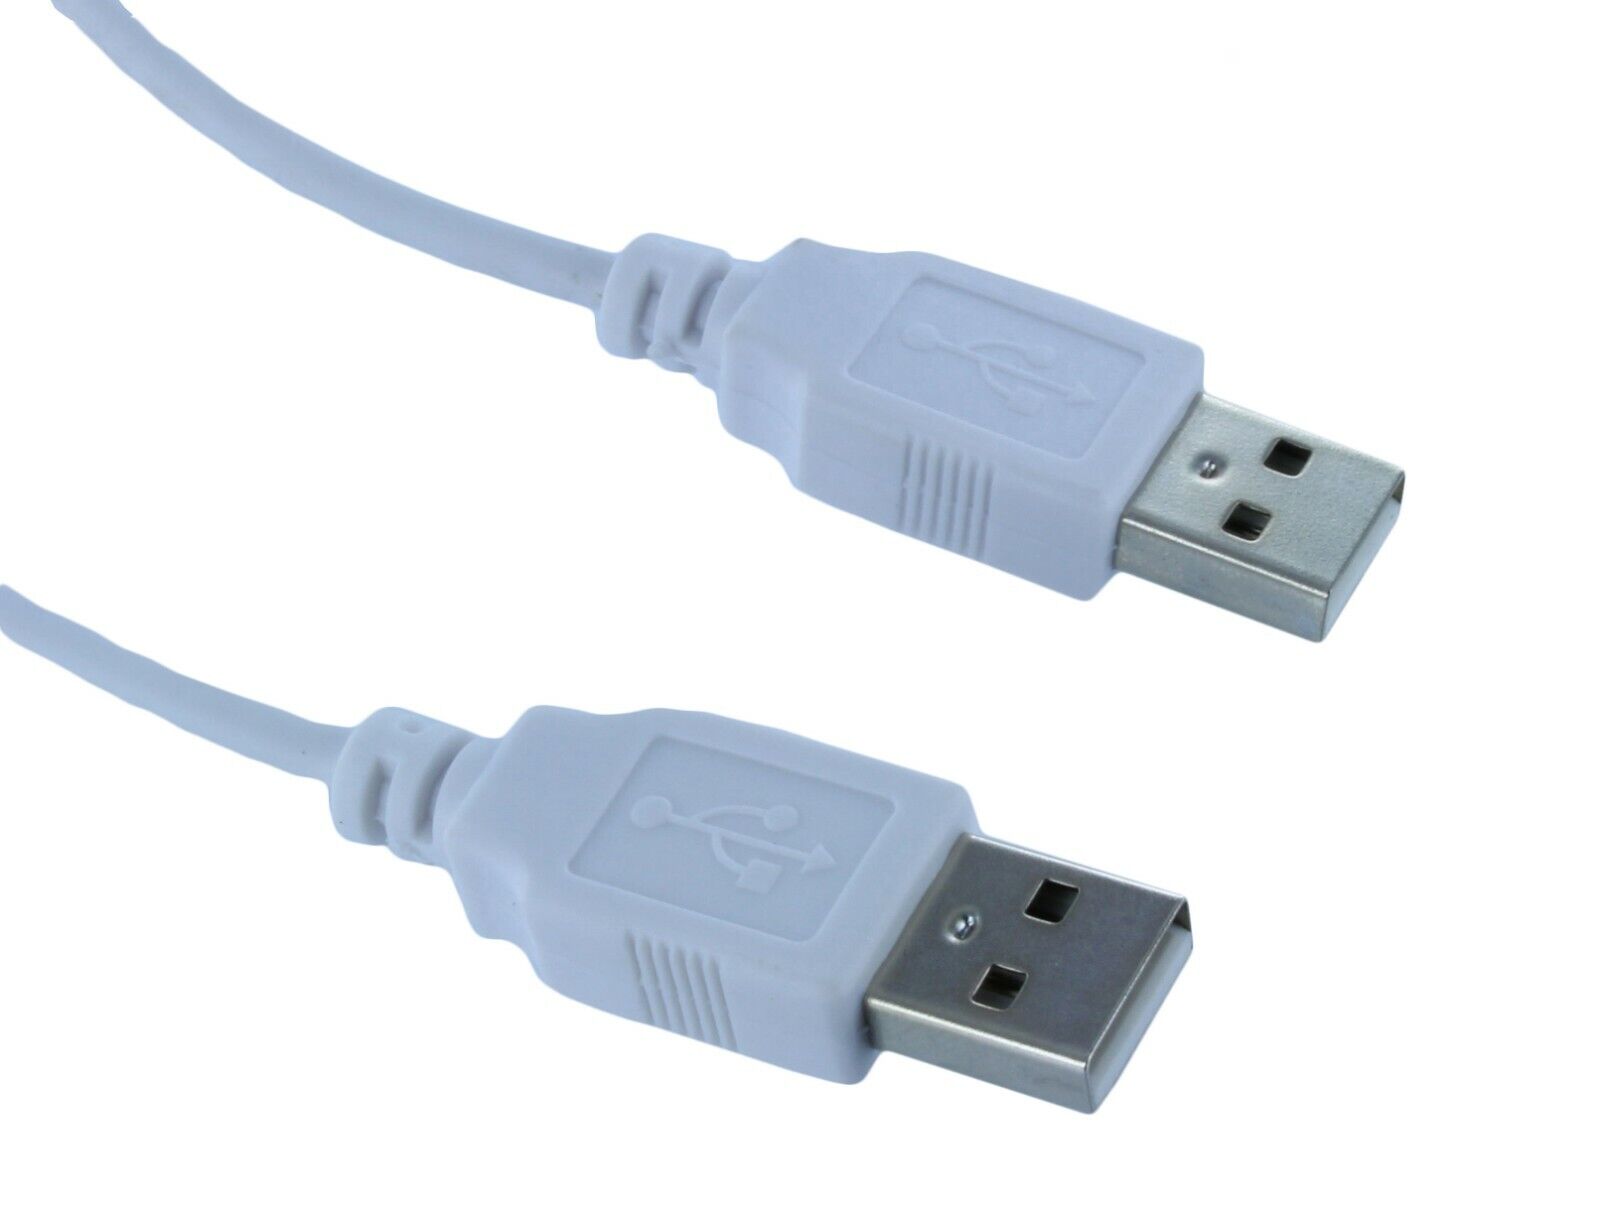 2 Pack 6Ft 6FEET USB2.0 Type A Male to Type A Male Cable Cord (U2A1-A1-06-2PK)